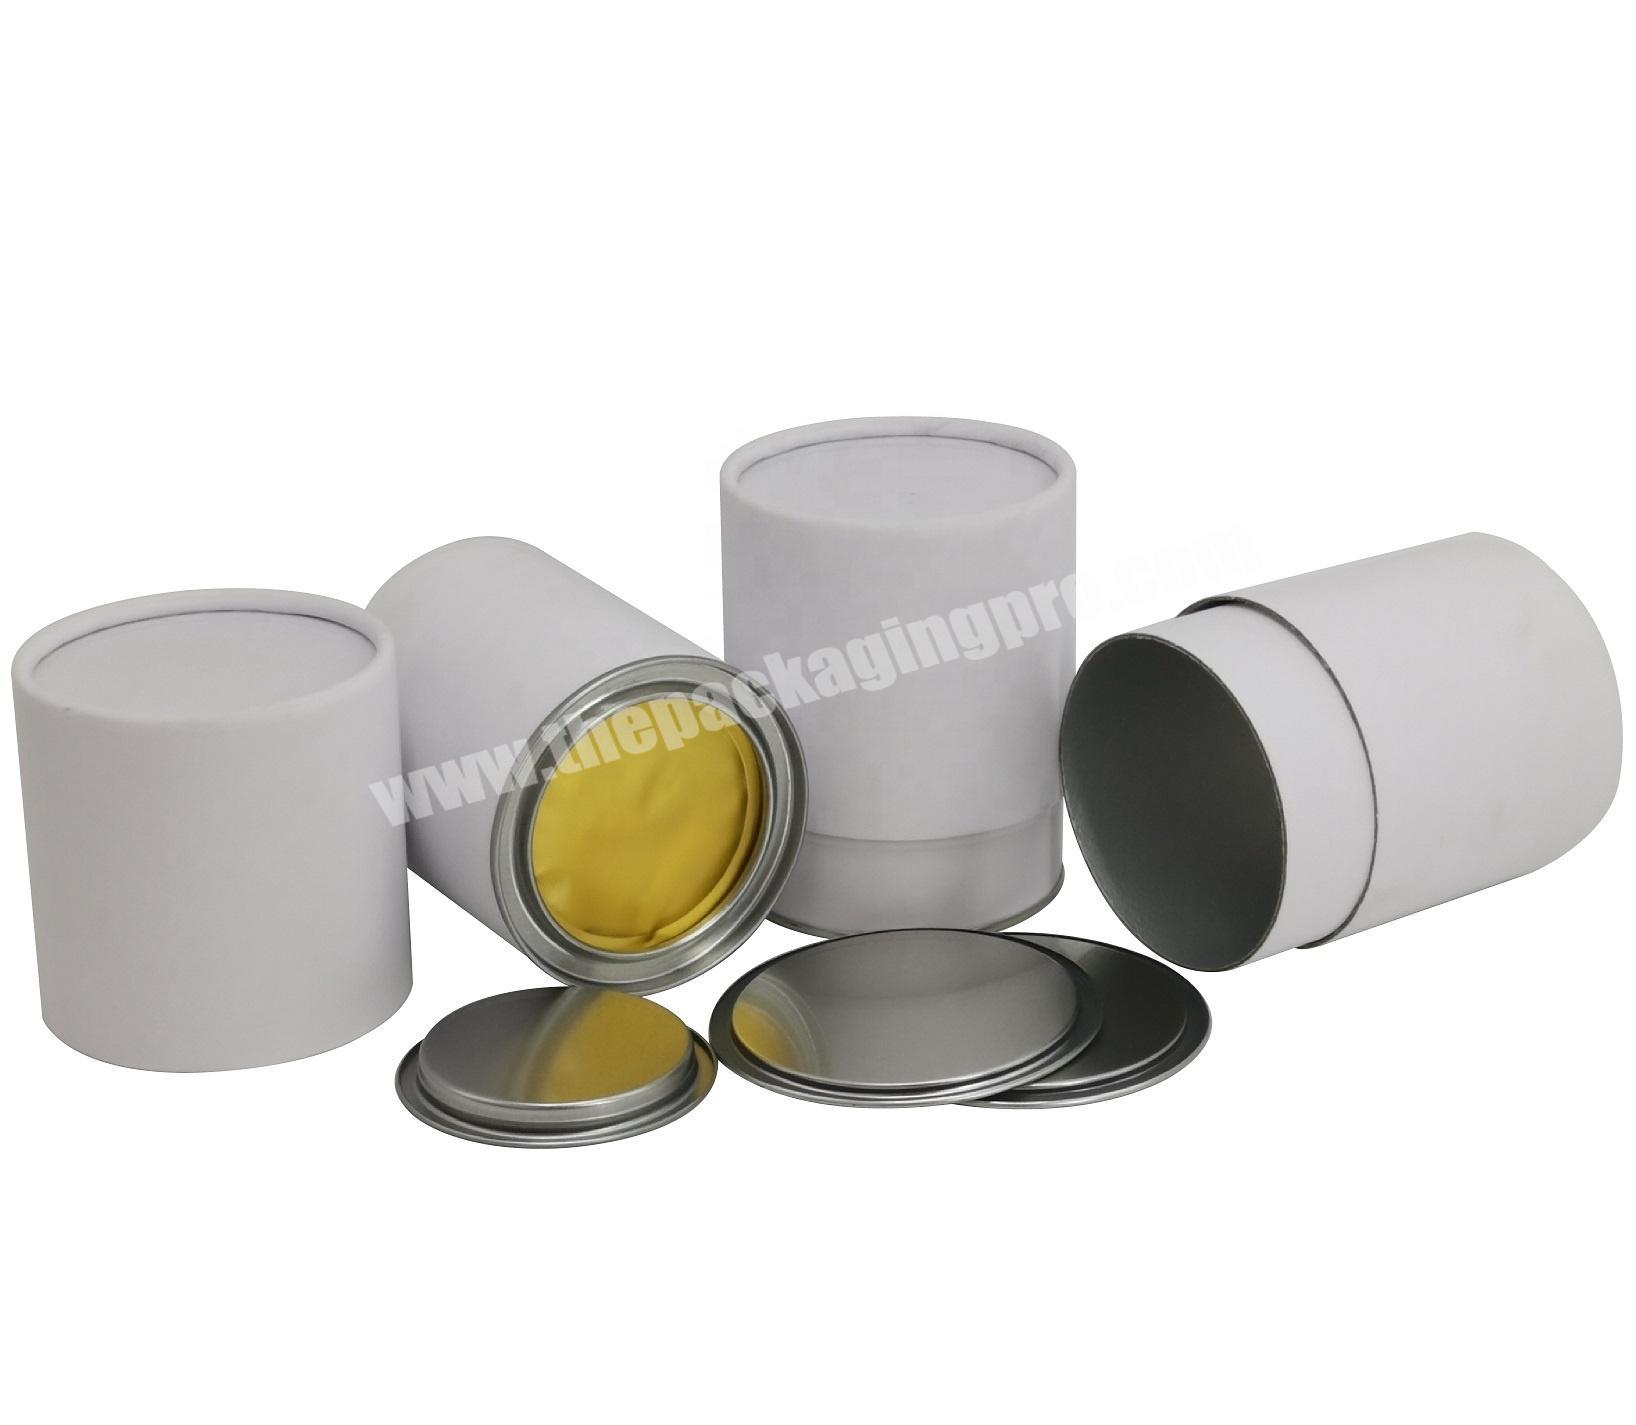 Top Aluminum Foil Secondary Seal Metal Pry Cover Air-proof Composite Paper Canister with Rolled Edge Cardboard Lid